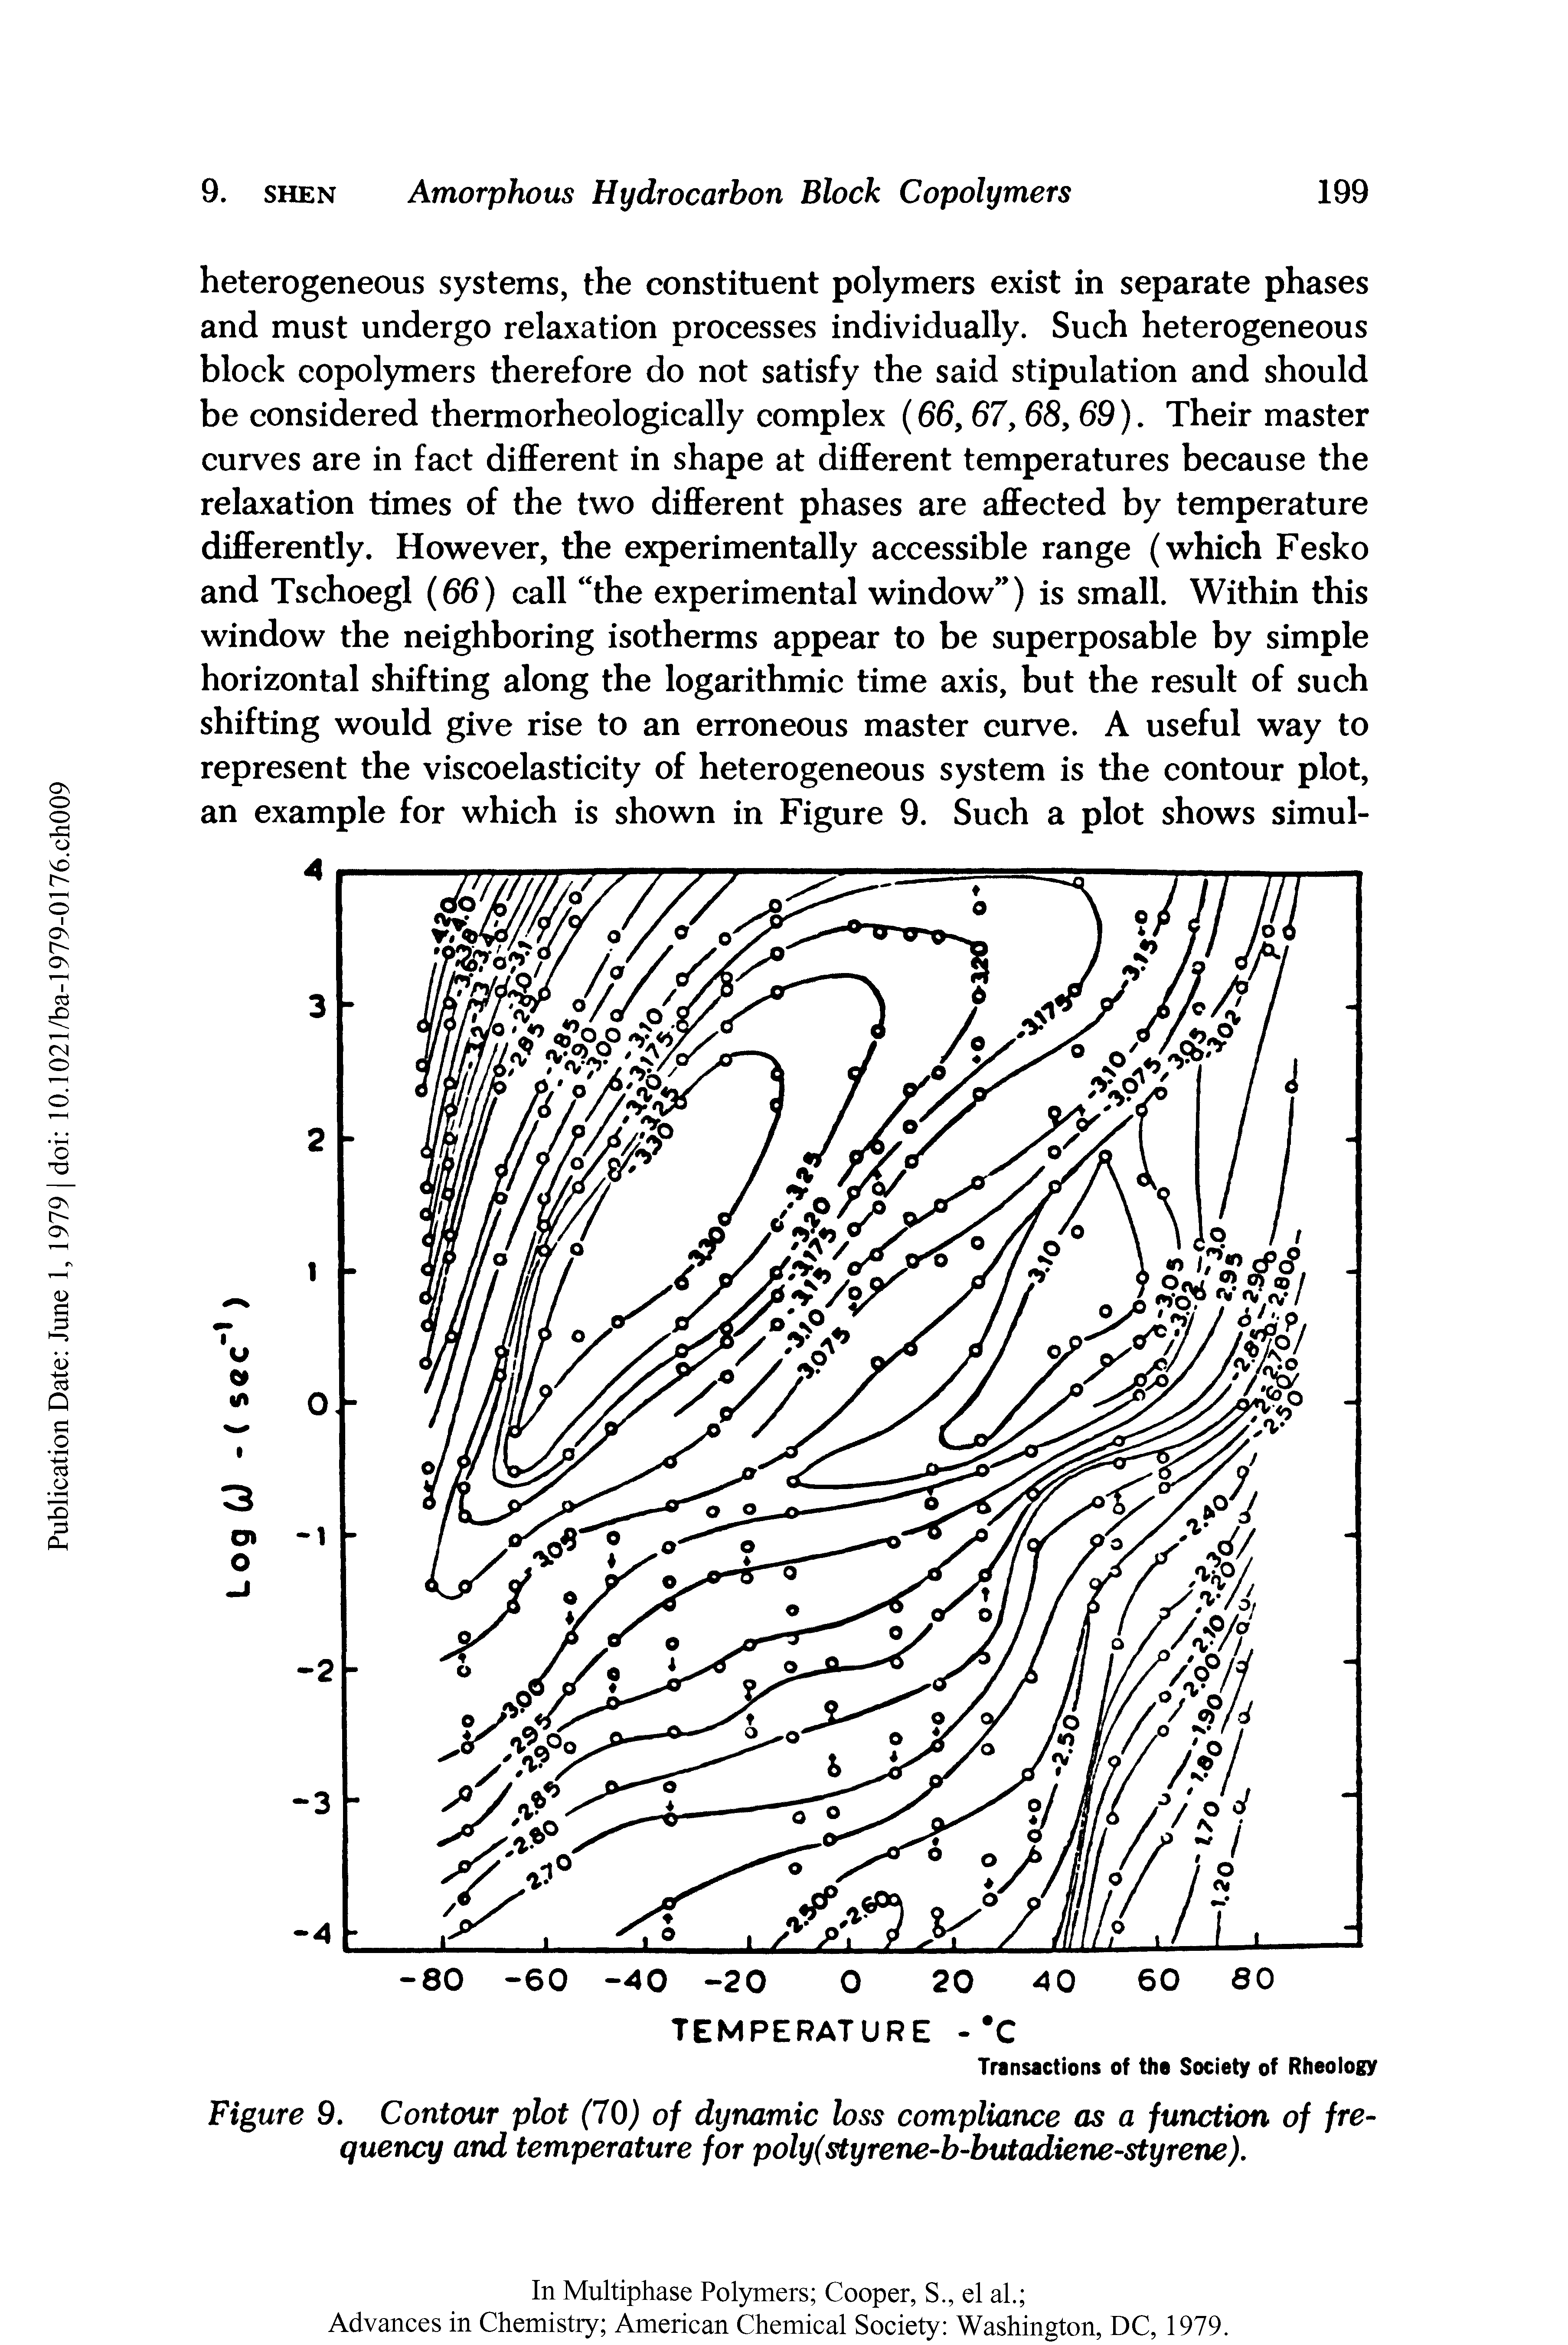 Figure 9. Contour plot (70) of dynamic loss compliance as a function of frequency and temperature for poly(styrene-b-butadiene-styrene).